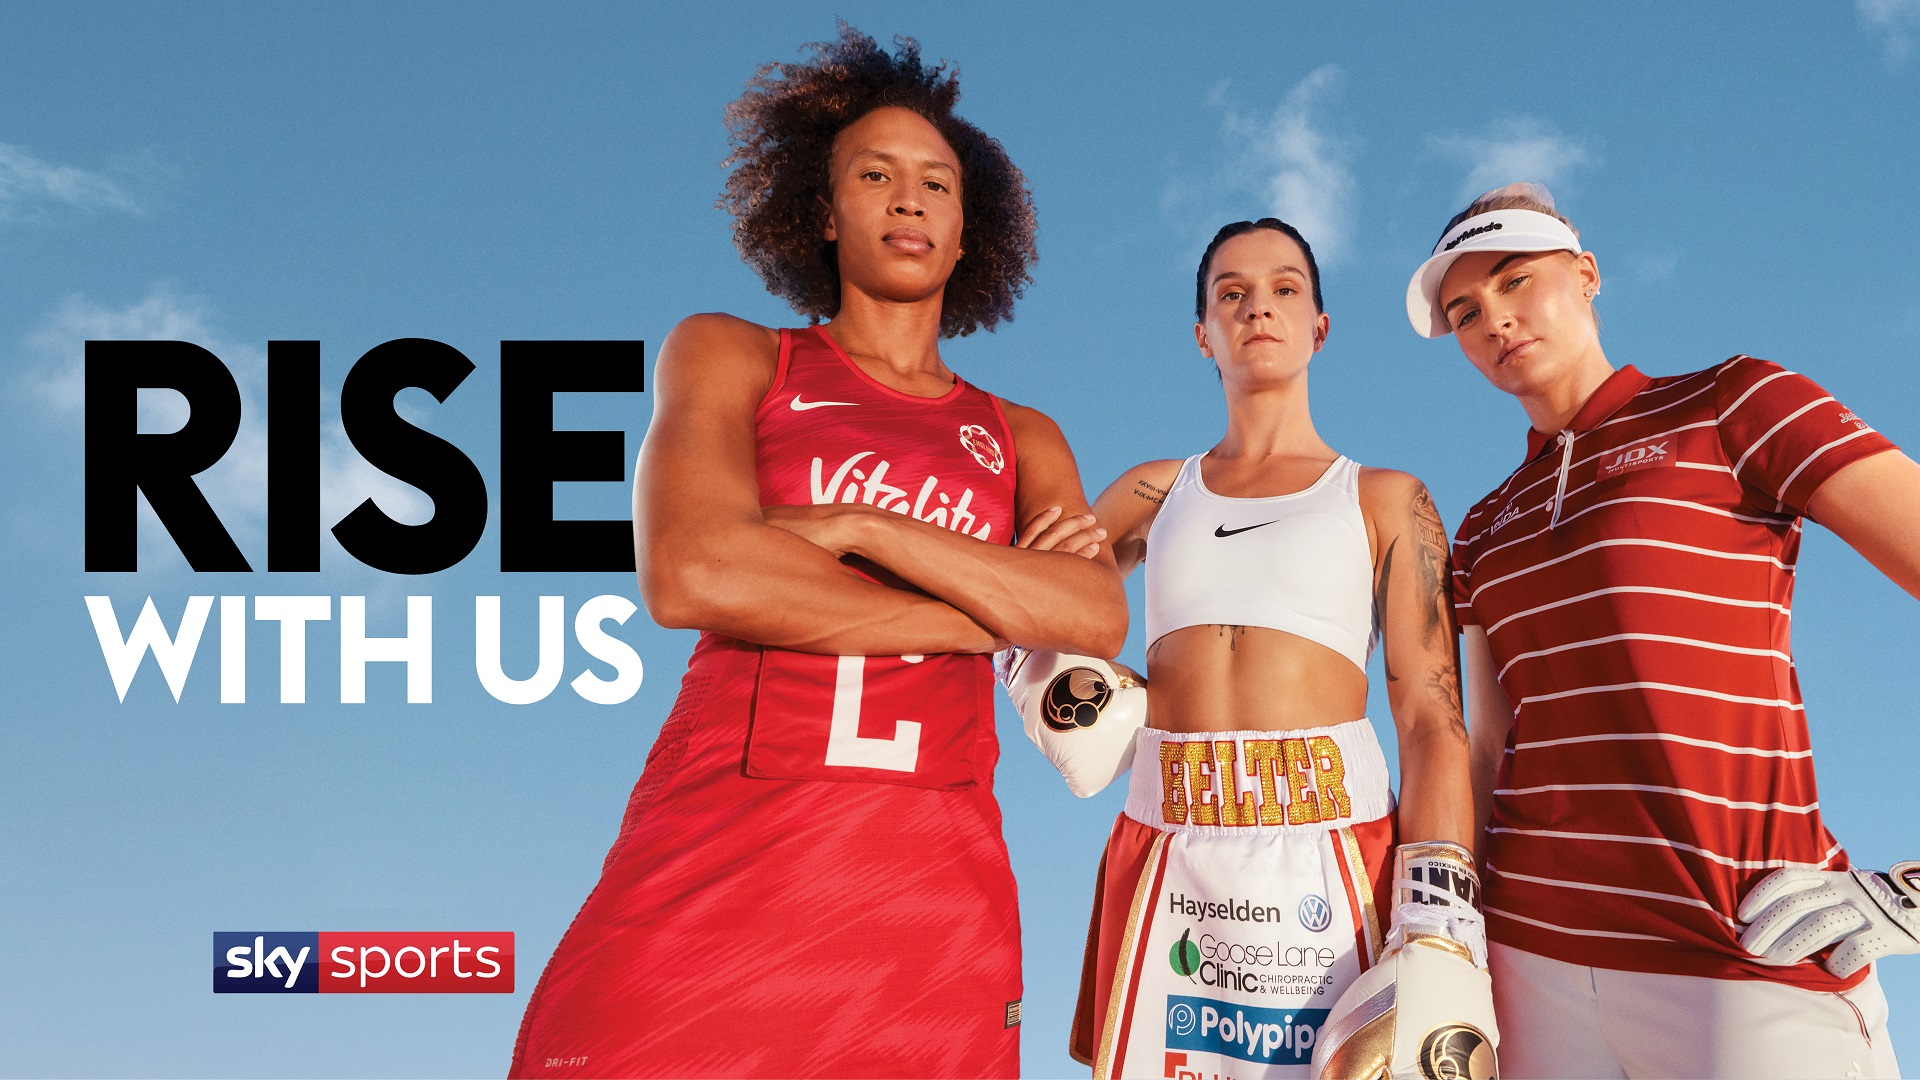 Sky increases commitment to womens sport